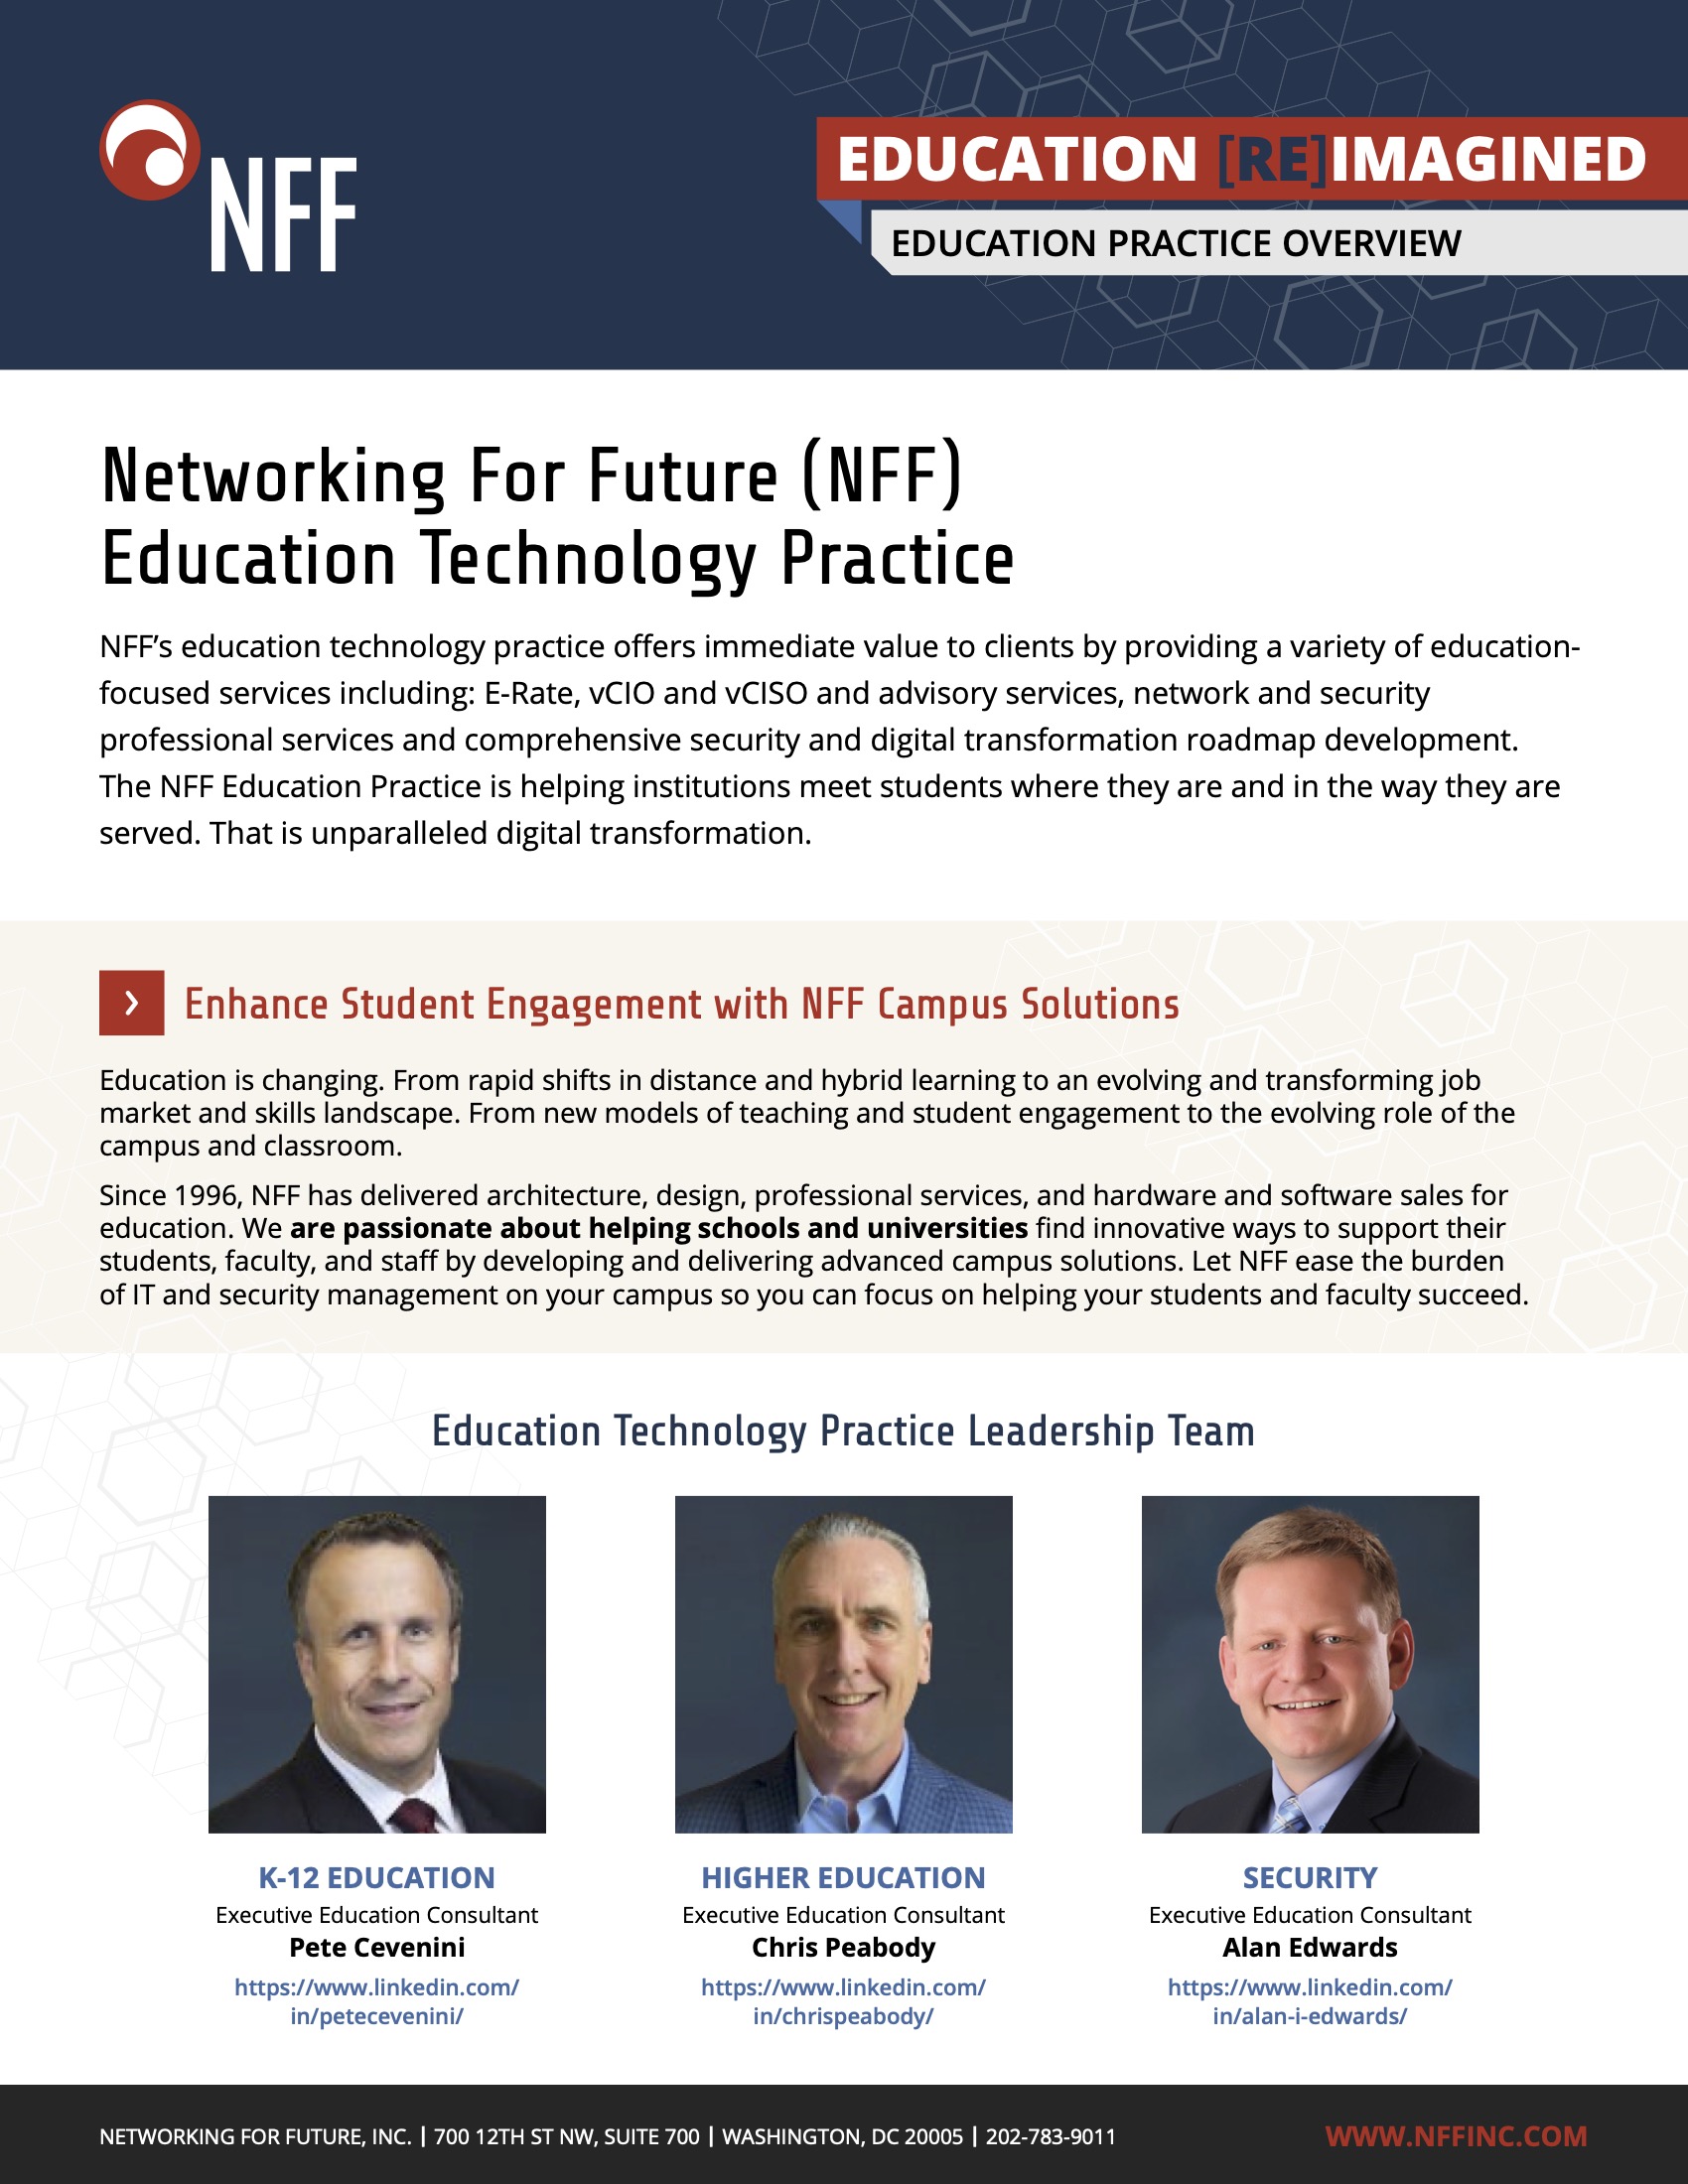 NFF Education Practice Featured Image